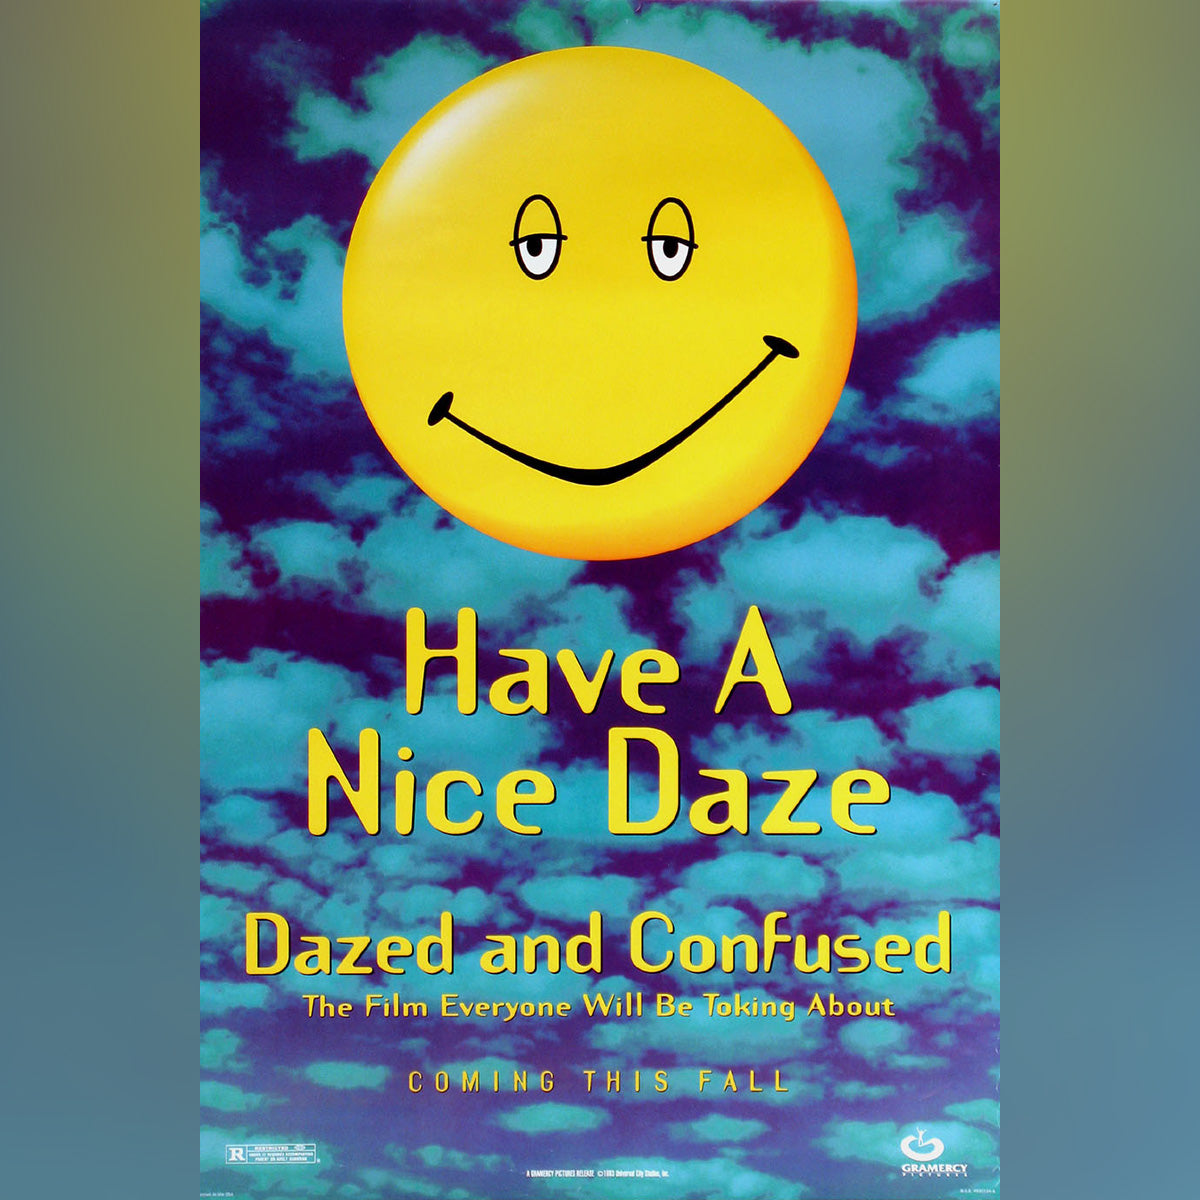 Original Movie Poster of Dazed And Confused (1993)